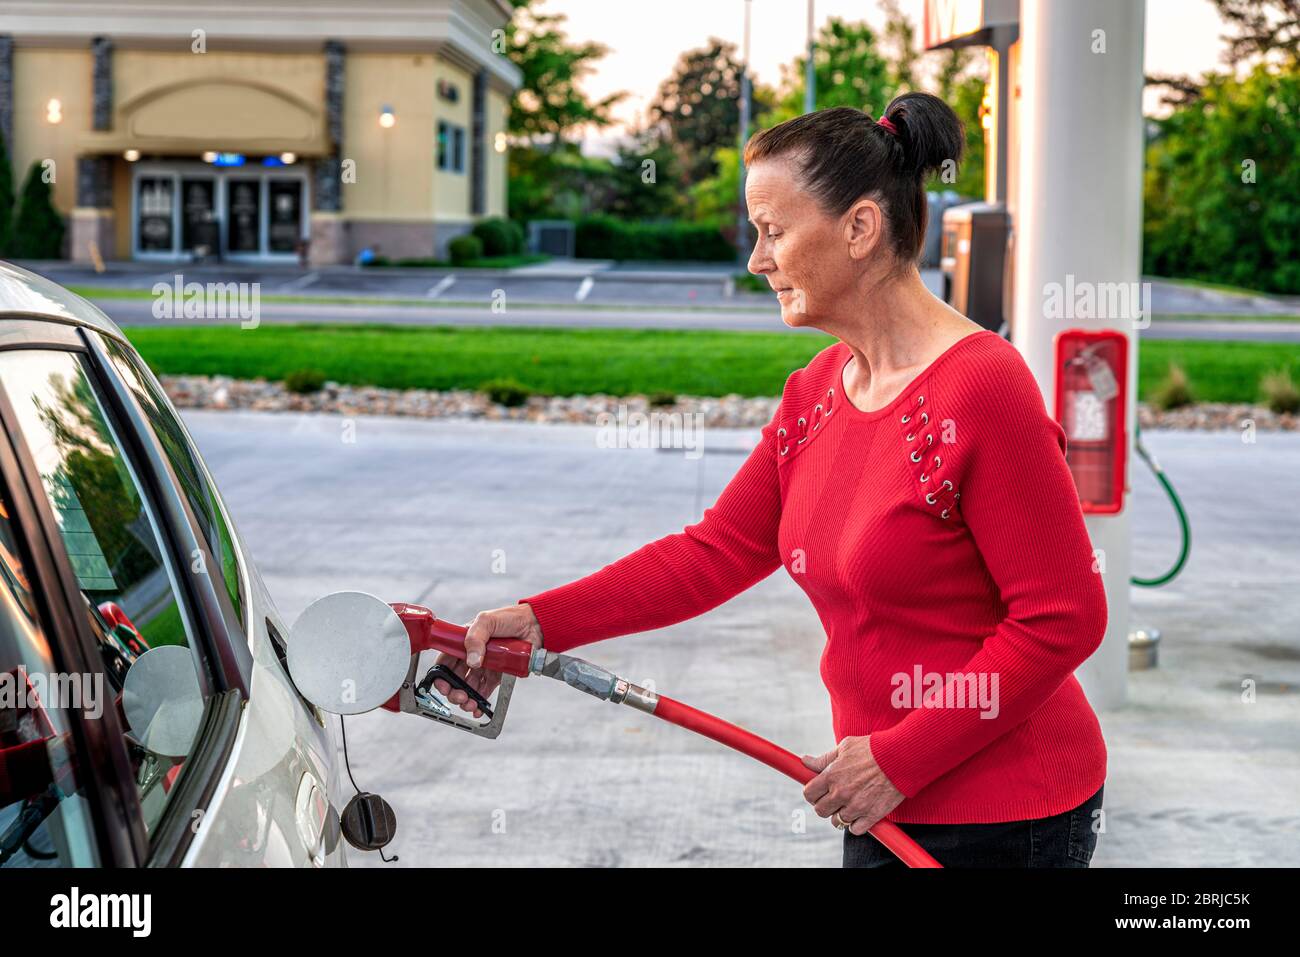 Horizontal shot of a middle-aged woman with her hair in a bun pumping gas in the early morning into her white car. Stock Photo